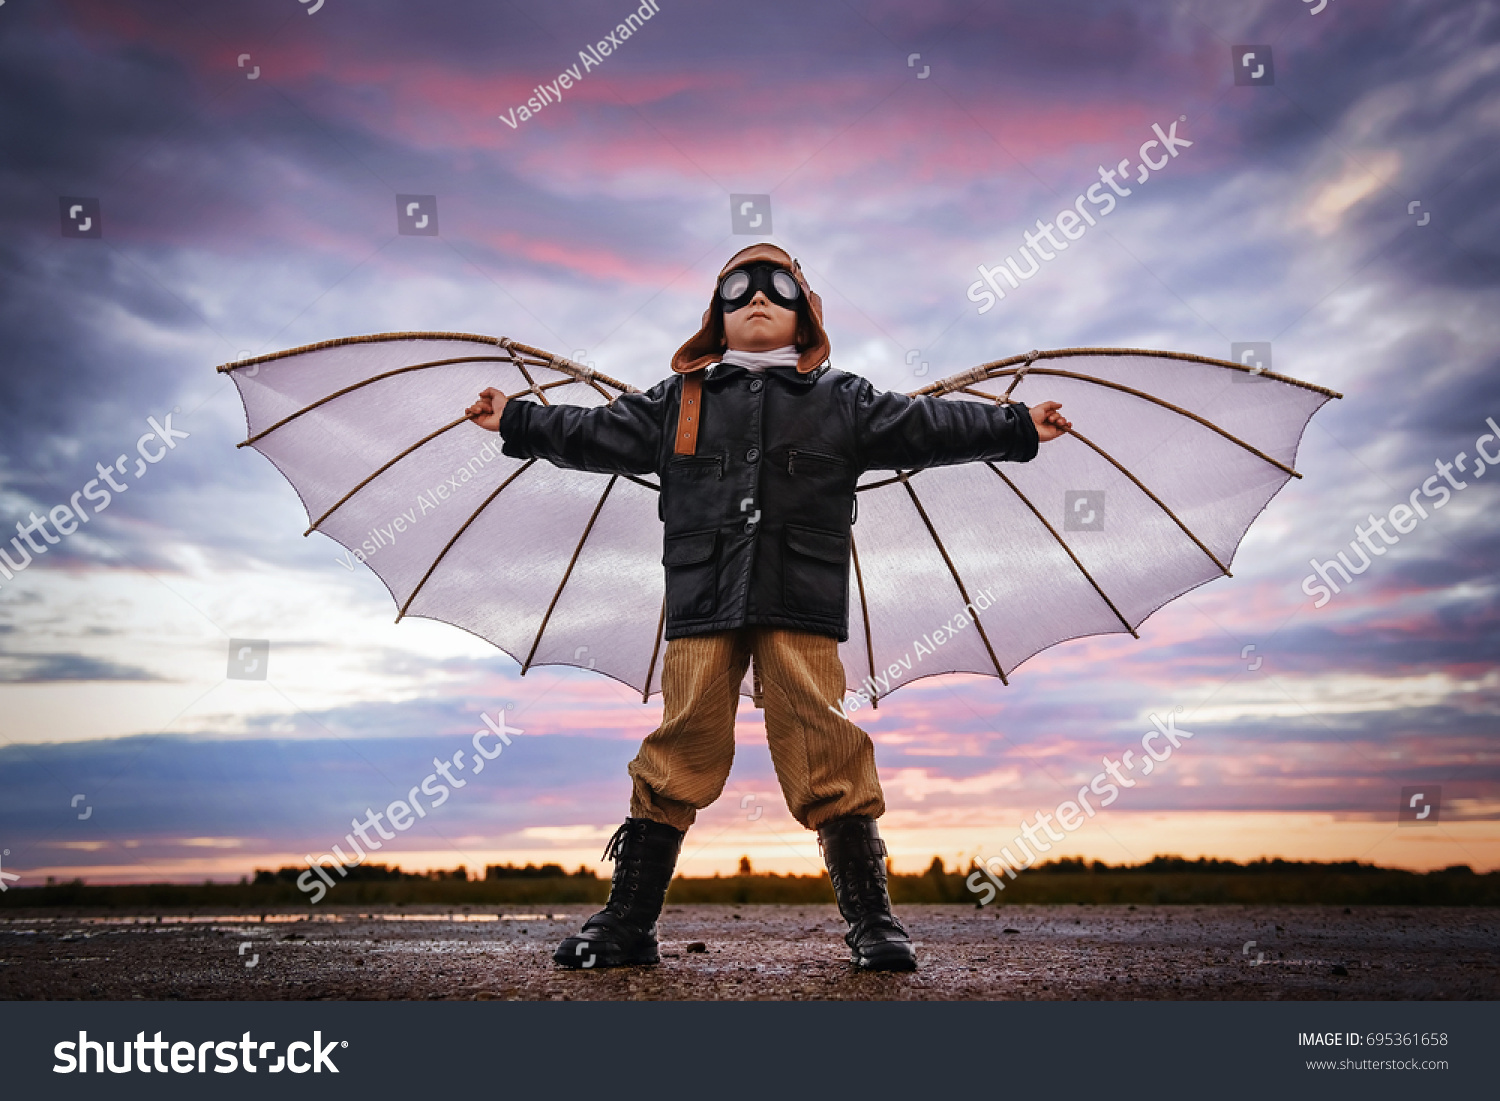 Boy with wings at sunset imagines himself a pilot and dreams of flying #695361658